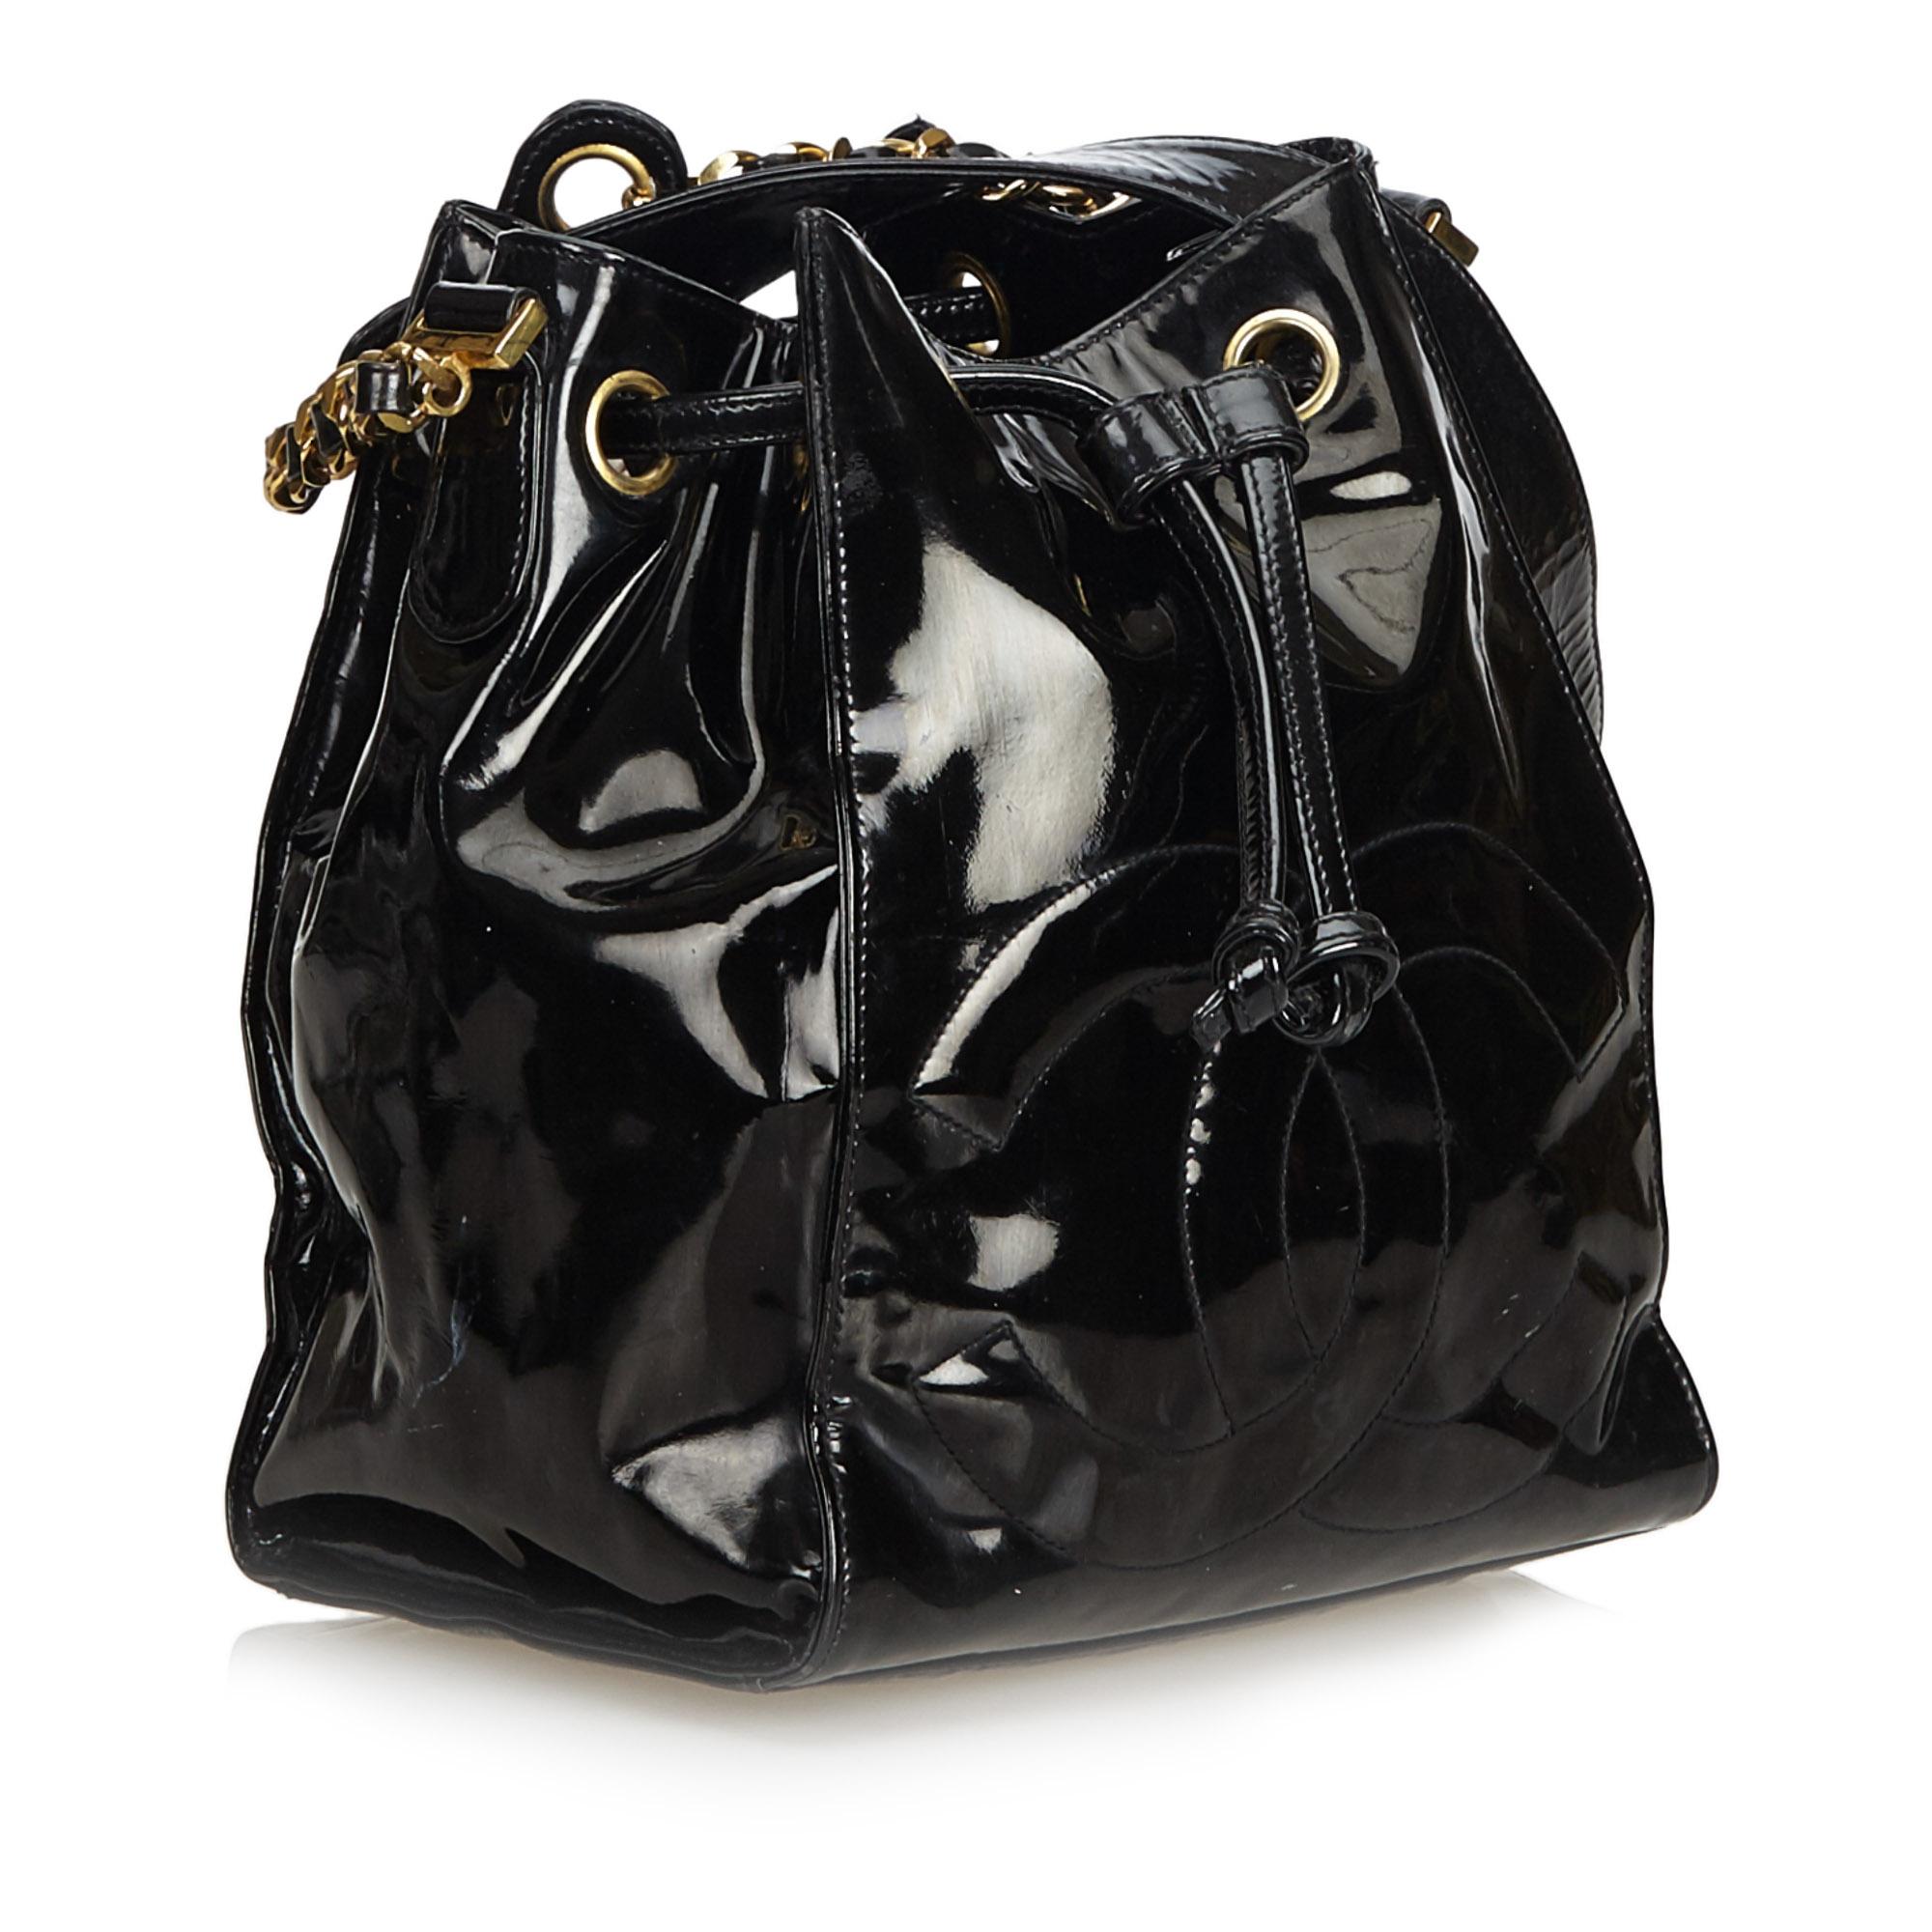 This bucket bag features a patent leather body, flat leather shoulder strap, and an open top with drawstring closure. It carries as B condition rating.

Inclusions: 
Authenticity Card
Pouch

Dimensions:
Length: 24.00 cm
Width: 22.00 cm
Depth: 16.00